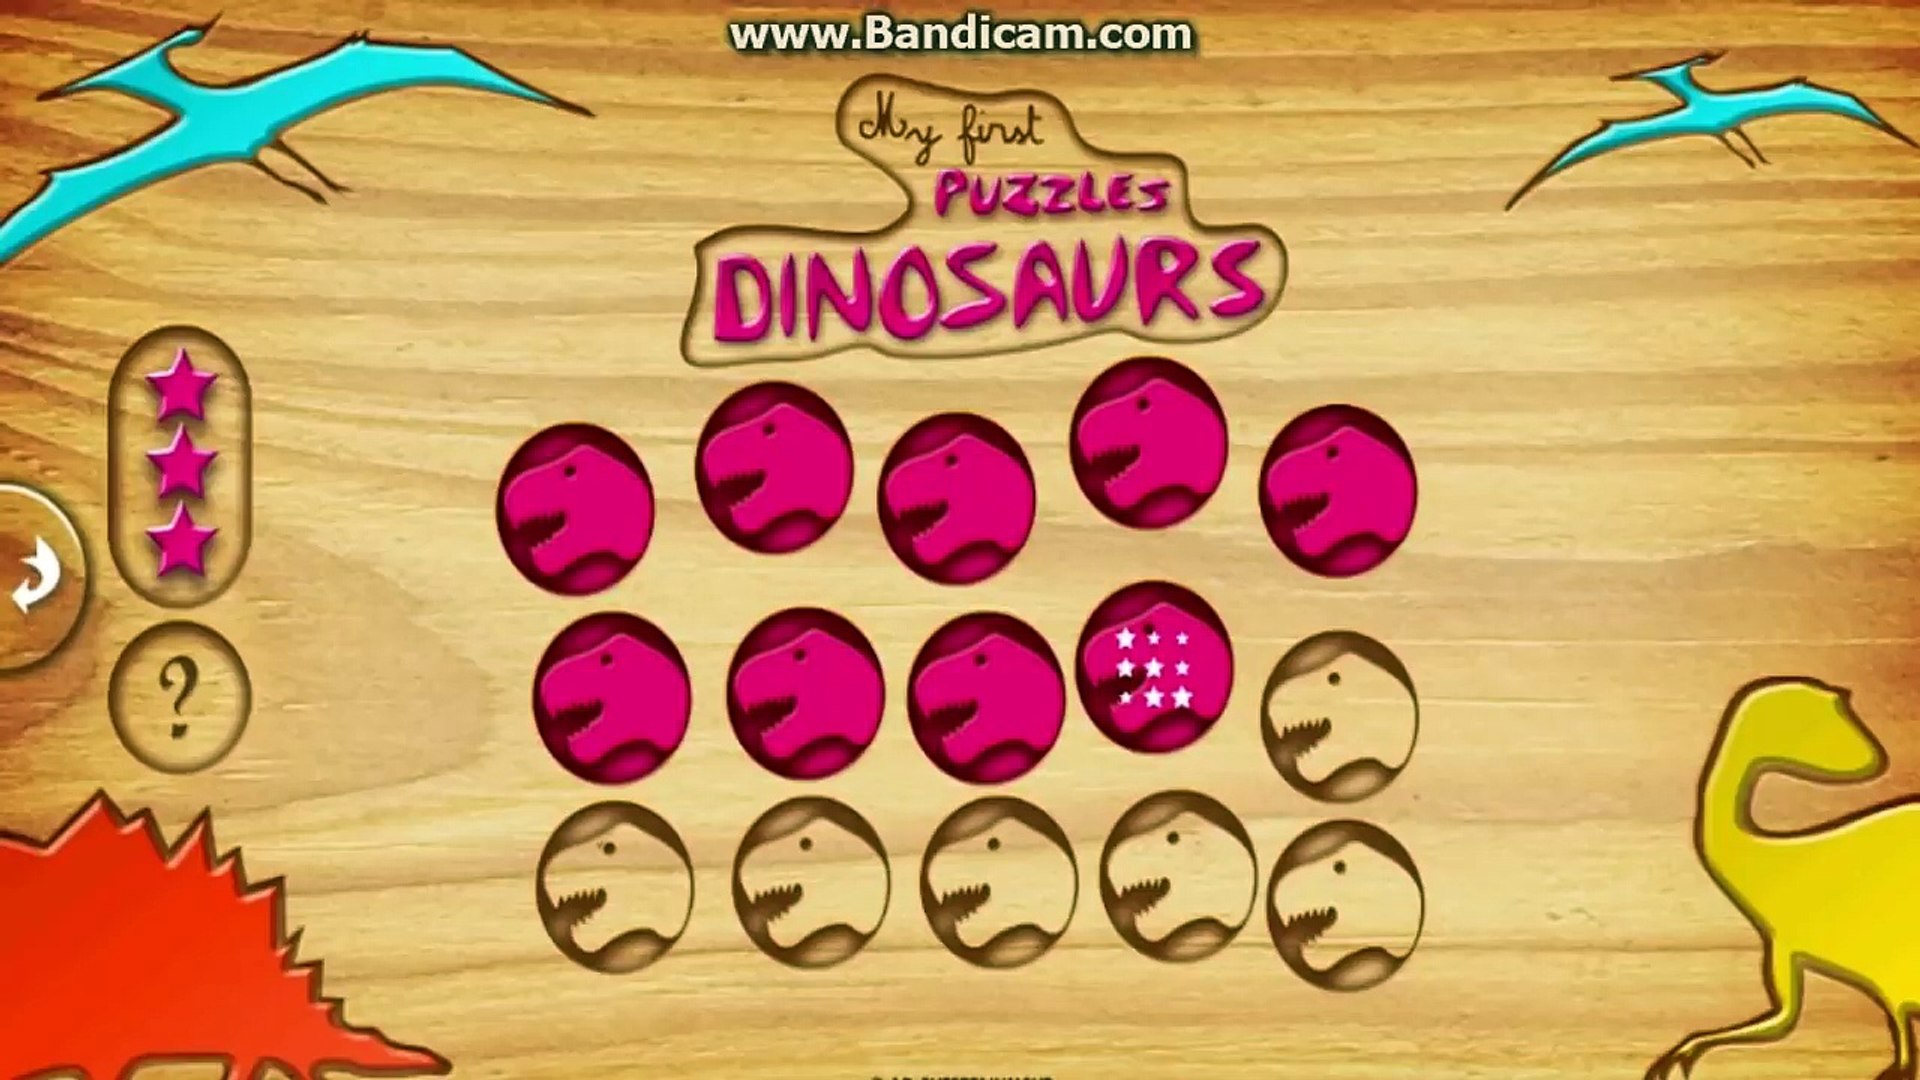 Dinosaur Kids Games - Kids Learn ABC Dinosaurs - Educational Videos for Kids - First Kids Puzzles